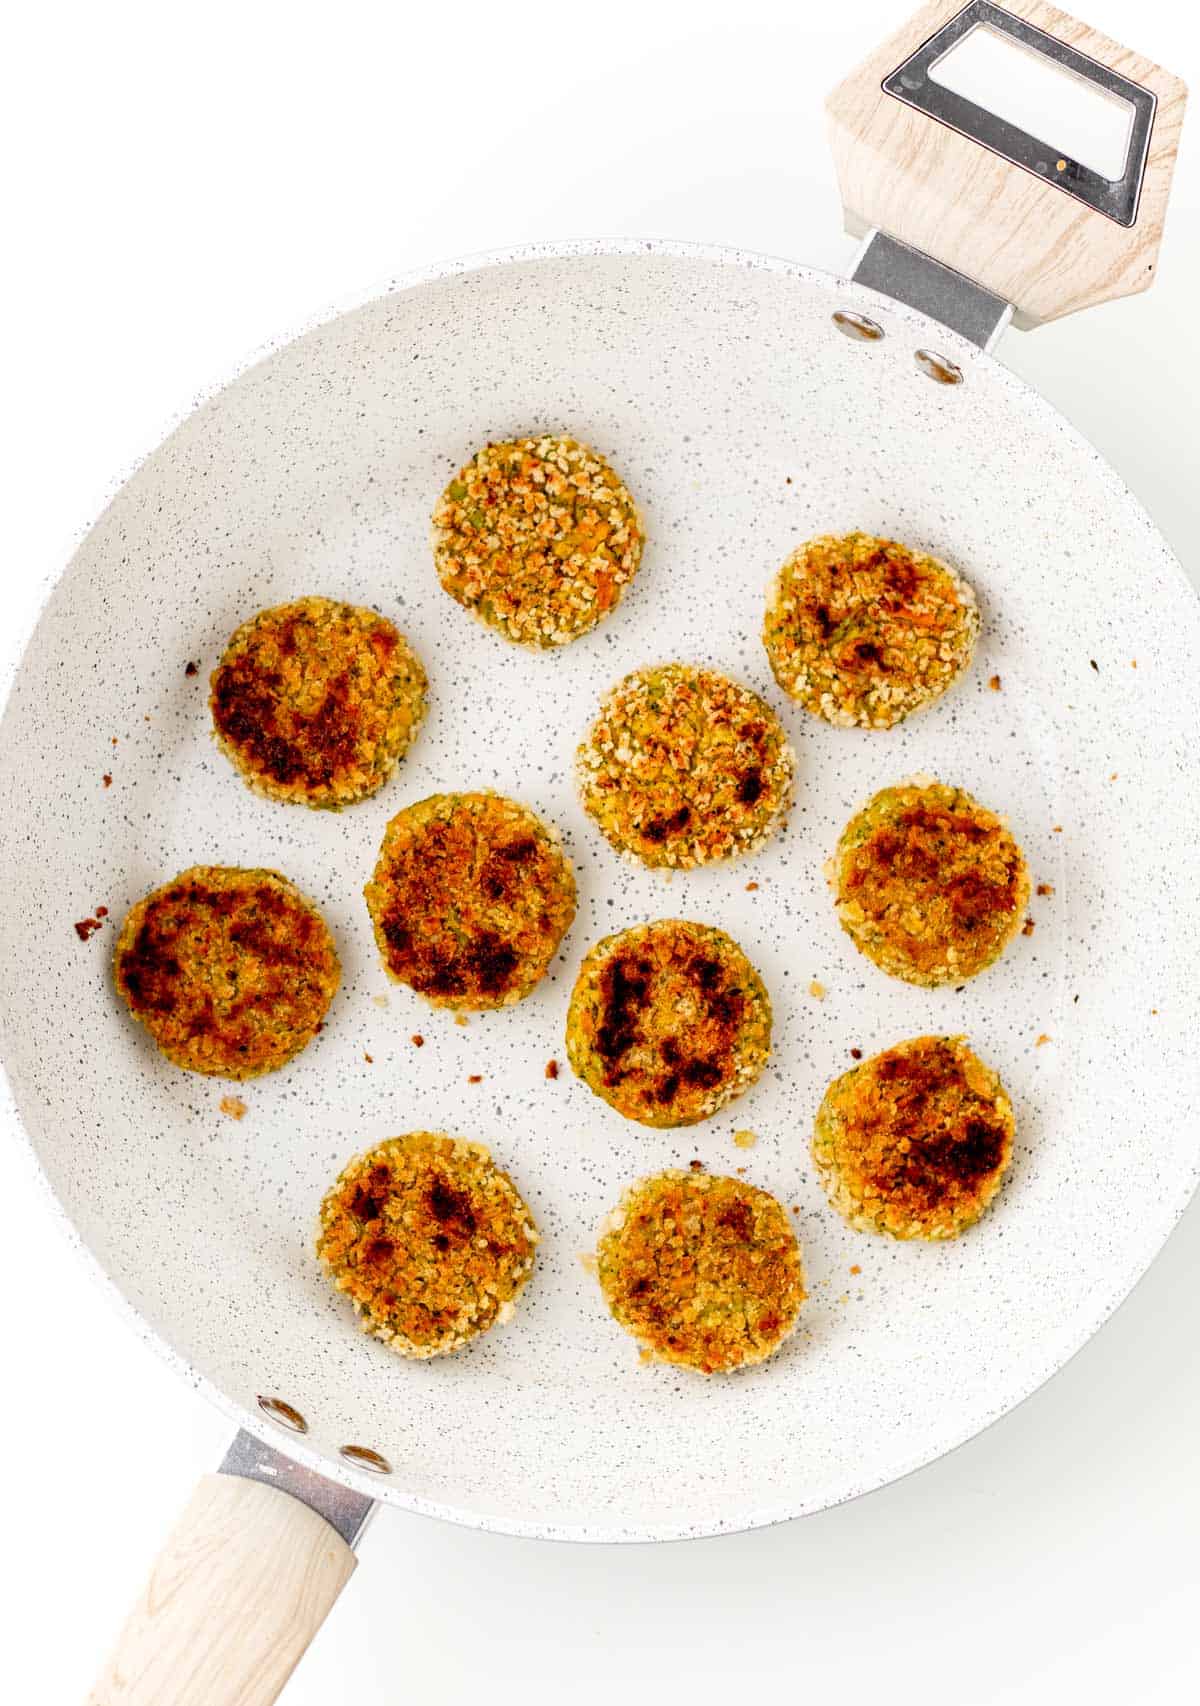 Cooking the chickpea veggie patties in a pan until crispy.